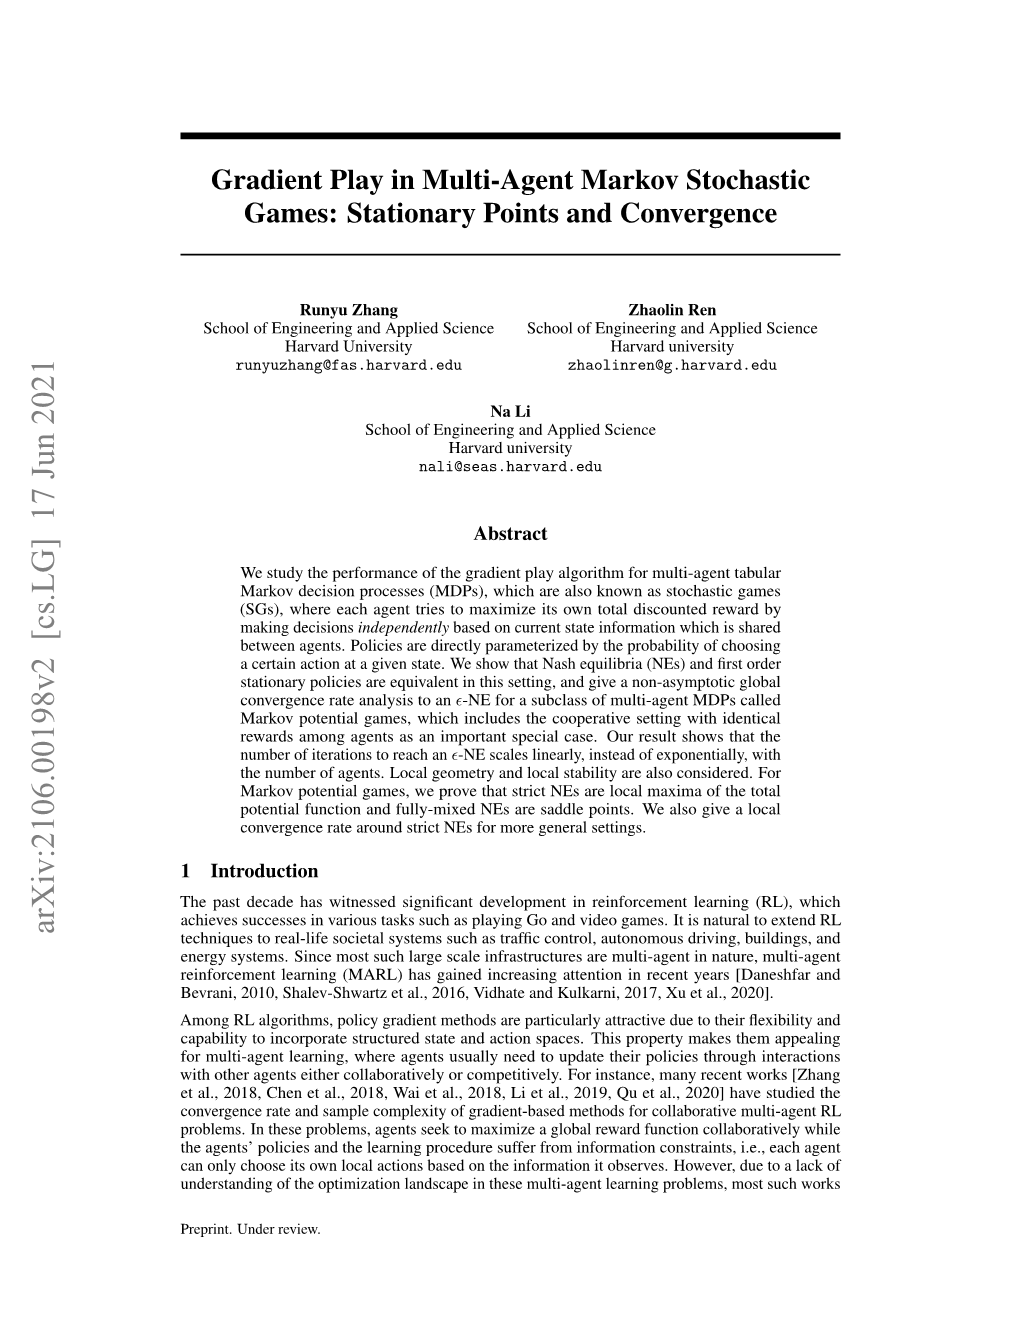 Gradient Play in Multi-Agent Markov Stochastic Games: Stationary Points and Convergence